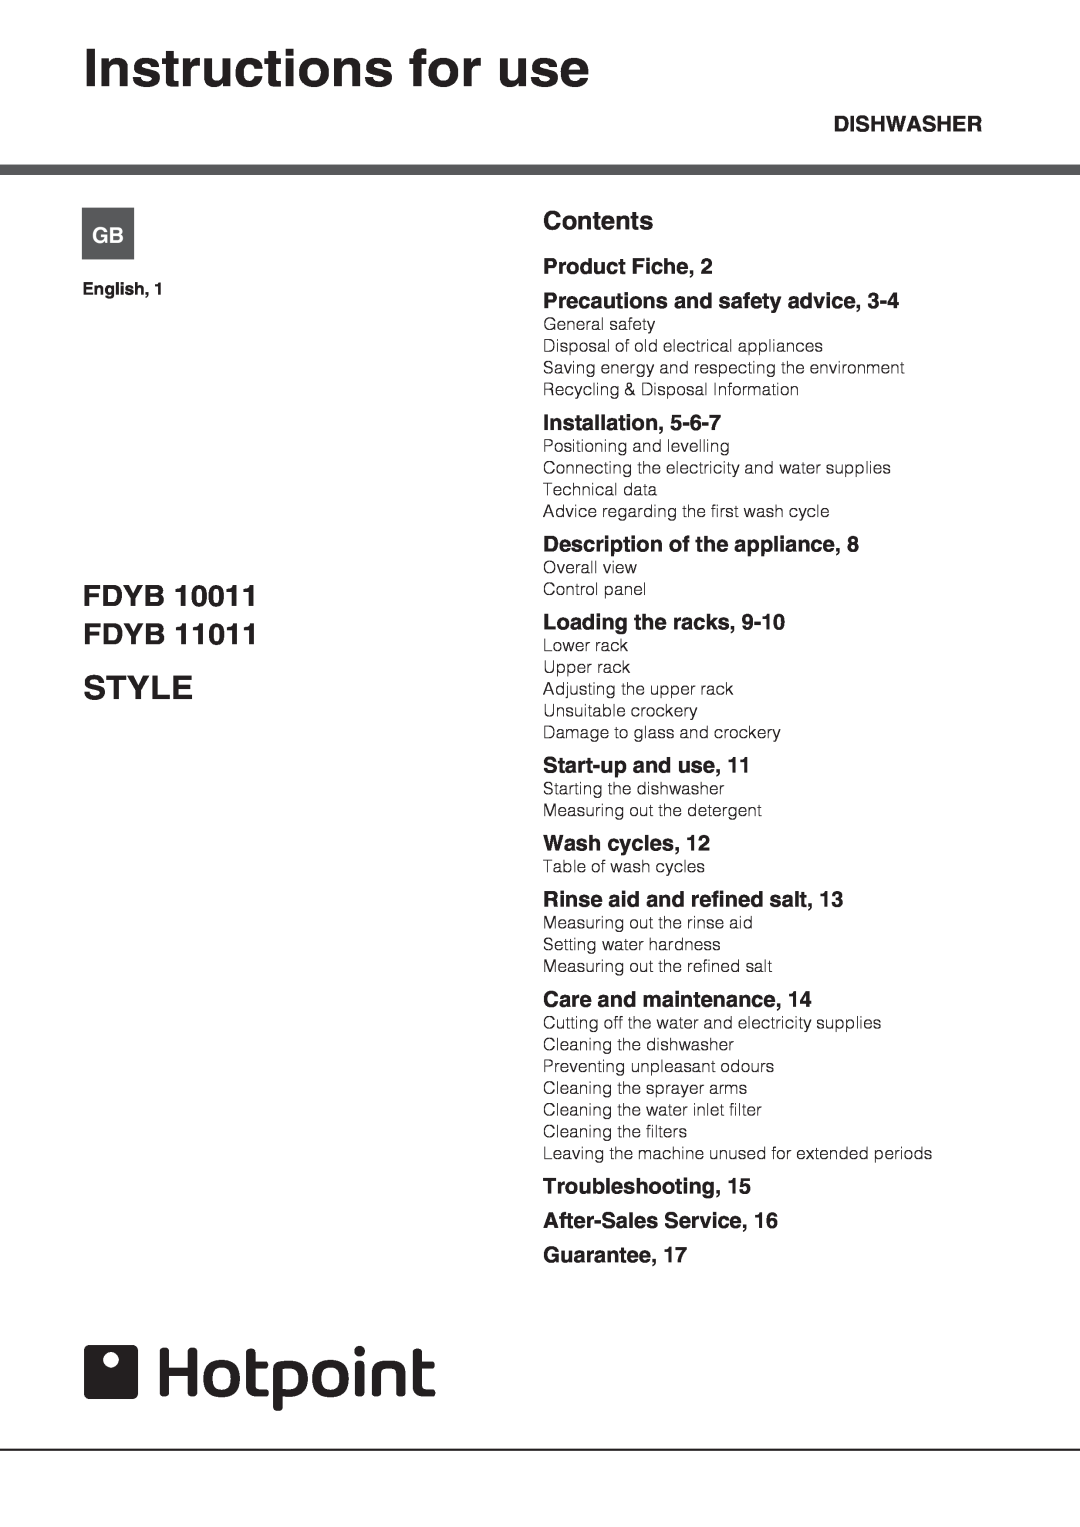 Hotpoint FDYB 11011 manual Instructions for use, Style, FDYB 10011 FDYB, Contents 